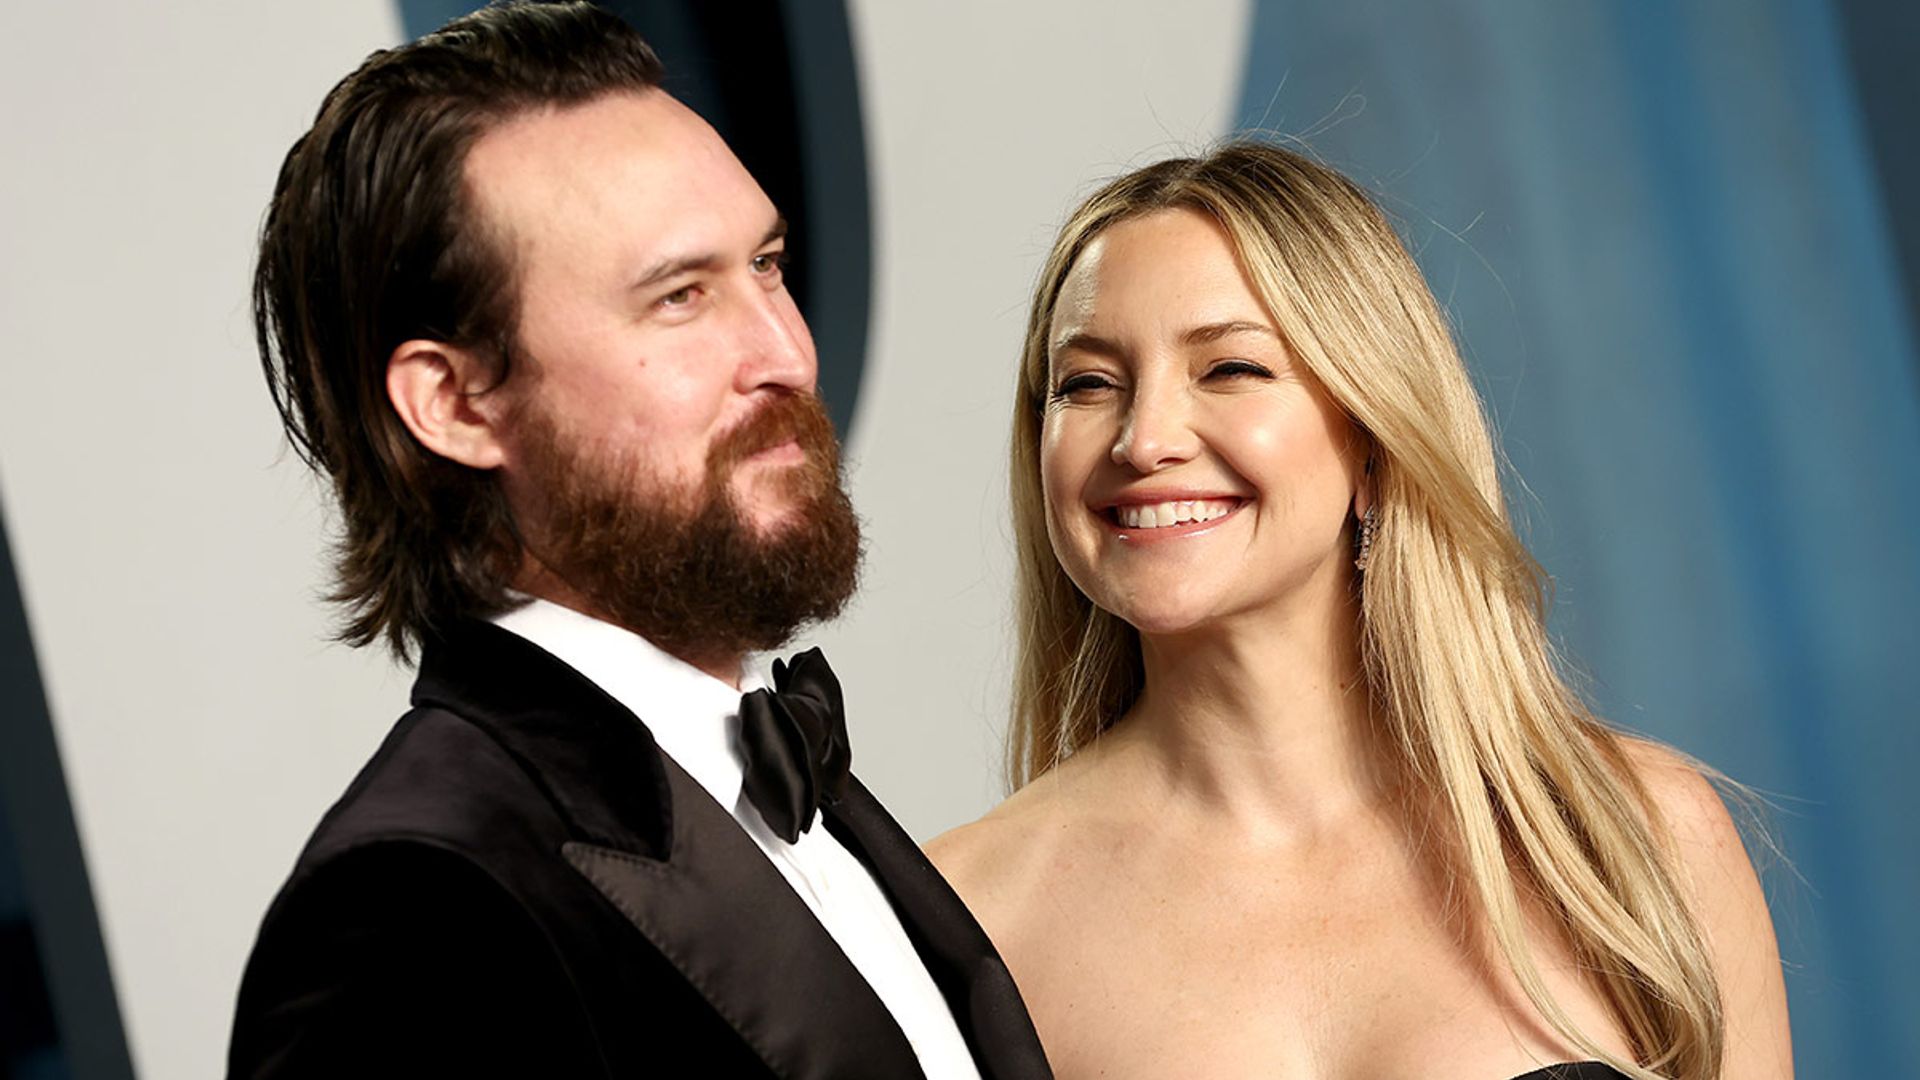 Kate Hudson shares never-before-seen photos of her lavish Los Angeles guest house